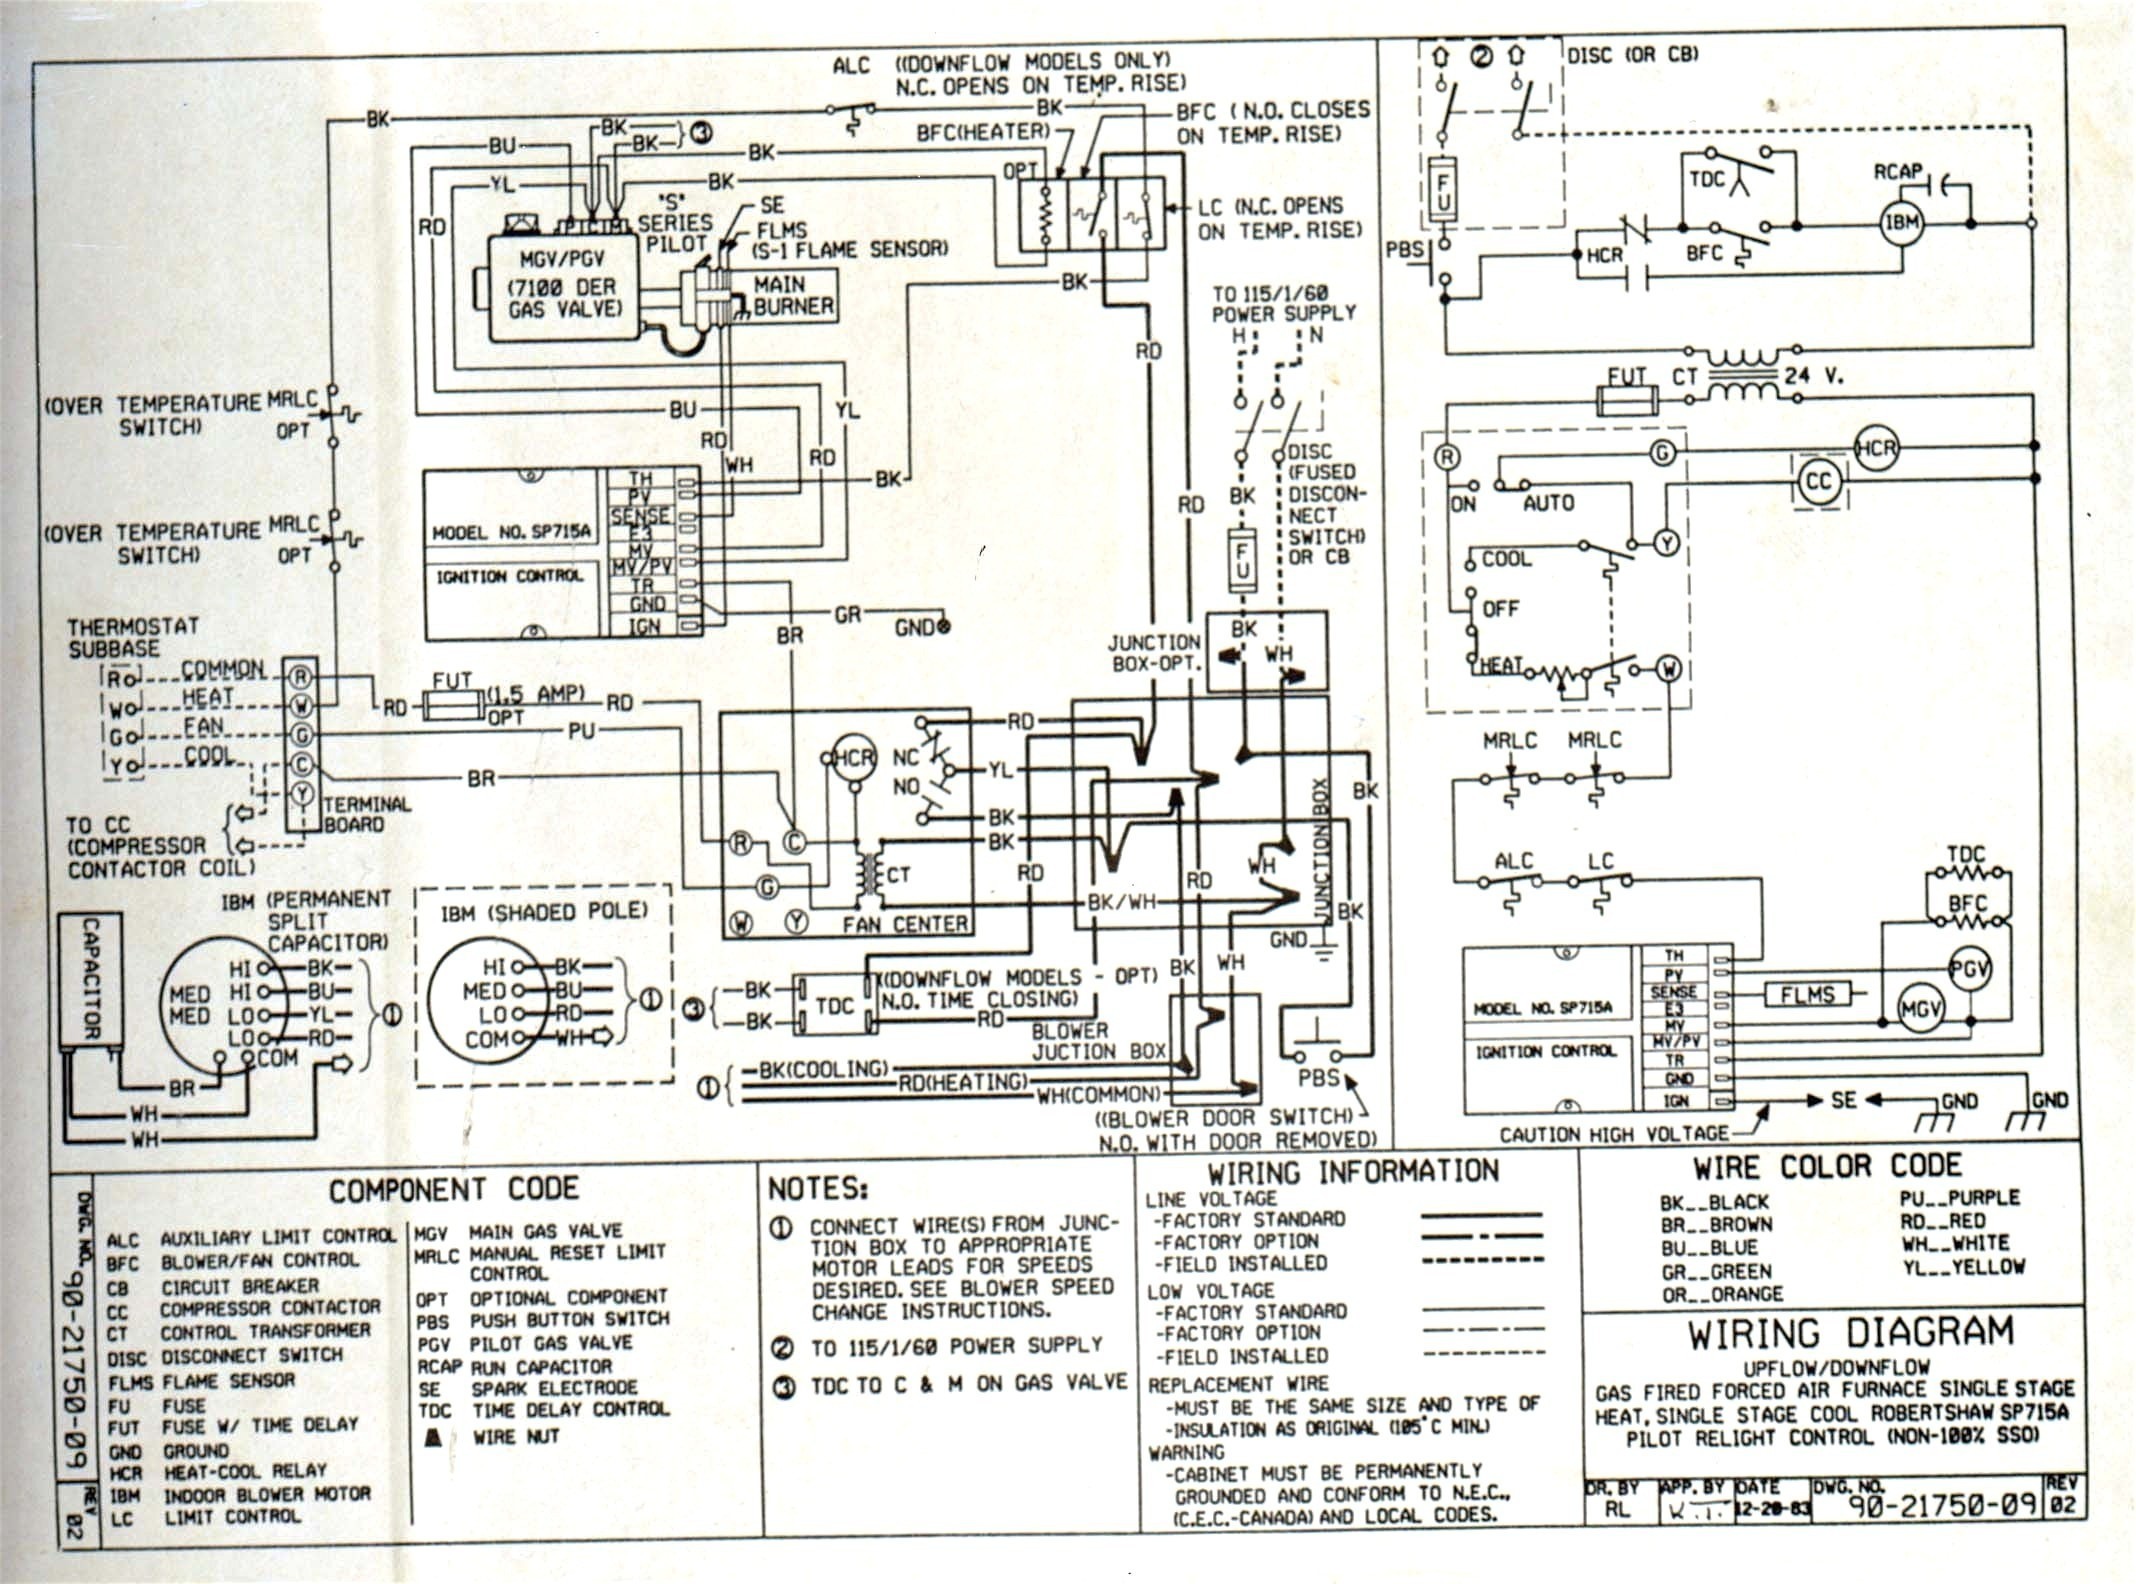 Wiring Diagram For Air Conditioning Unit Best Mcquay Air Conditioner